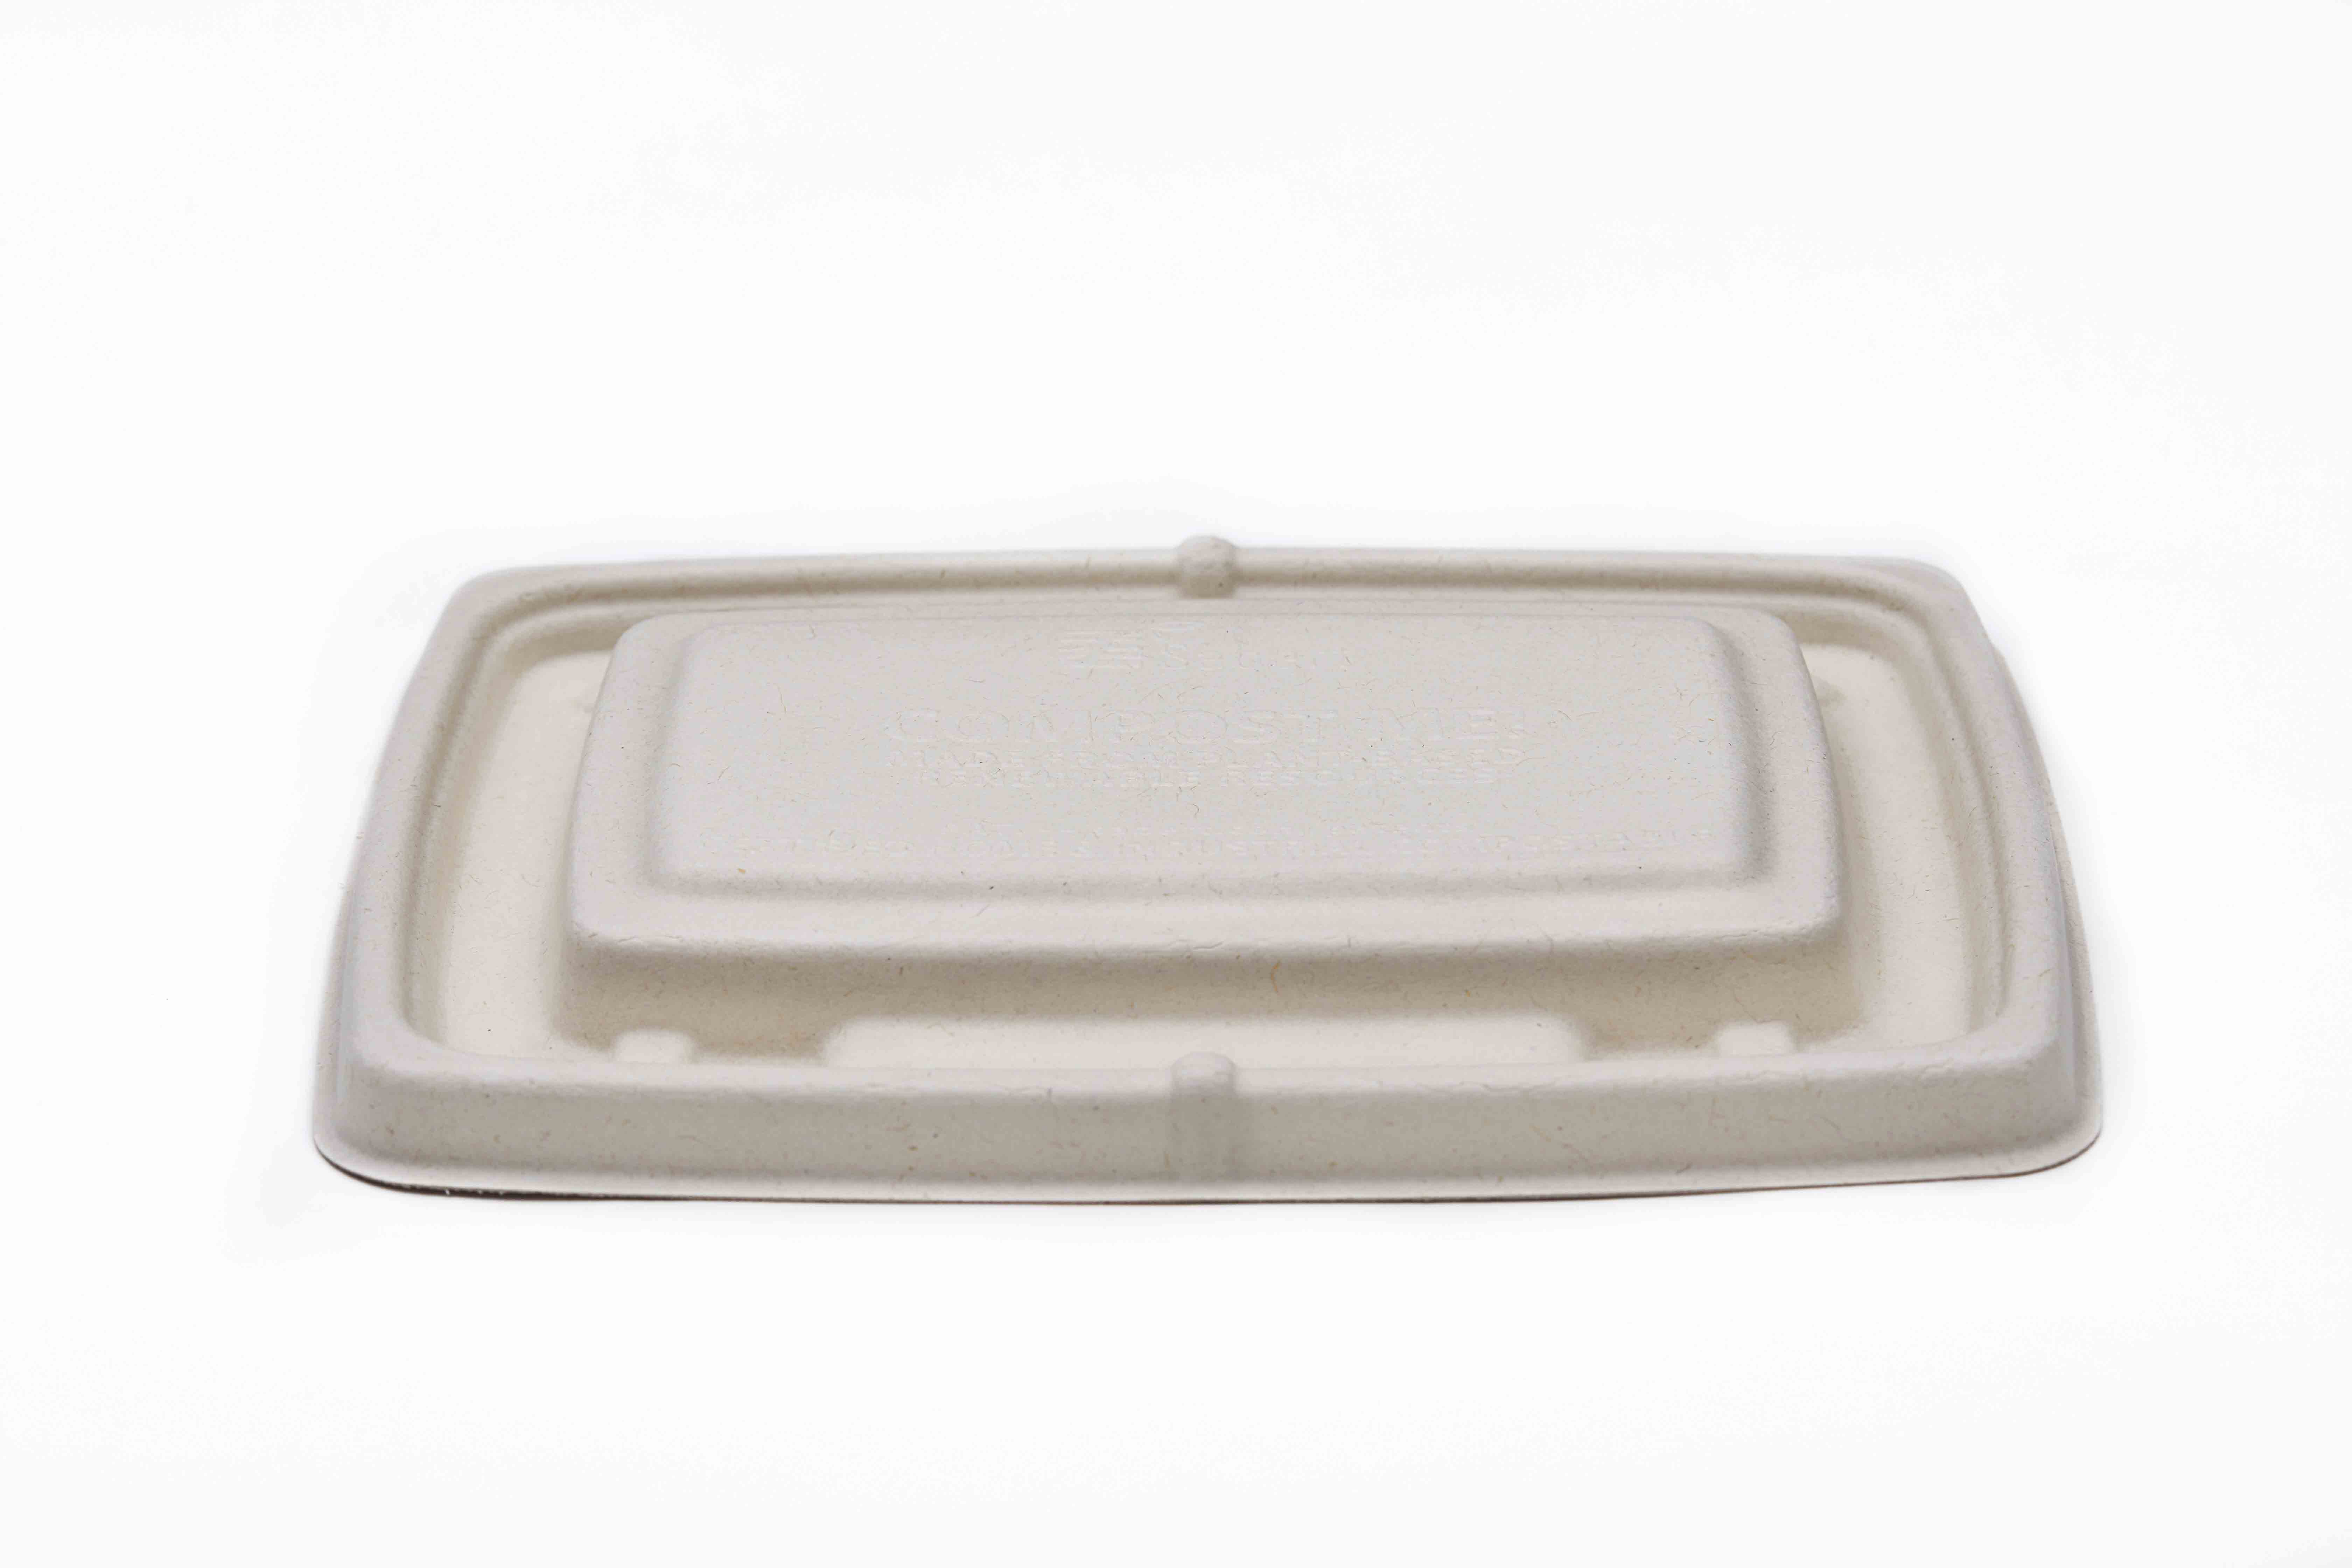 Pulp lid for 6X9 pulp tray - New